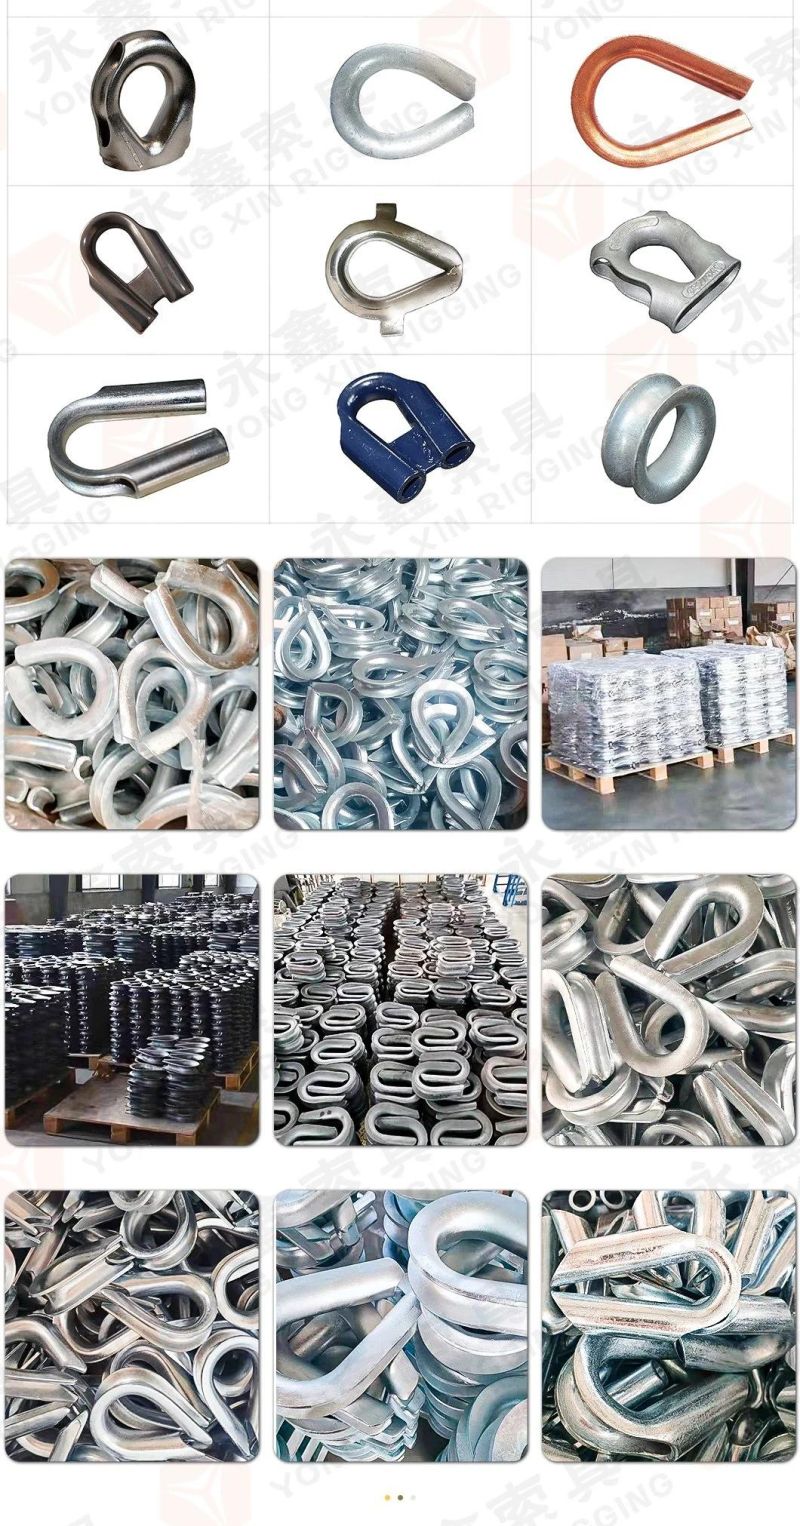 High Quality 1/2" 3/4" 7/8" G414 Hot DIP Galvanized Rigging Hardware Heavy Duty Us Type Cable Thimble